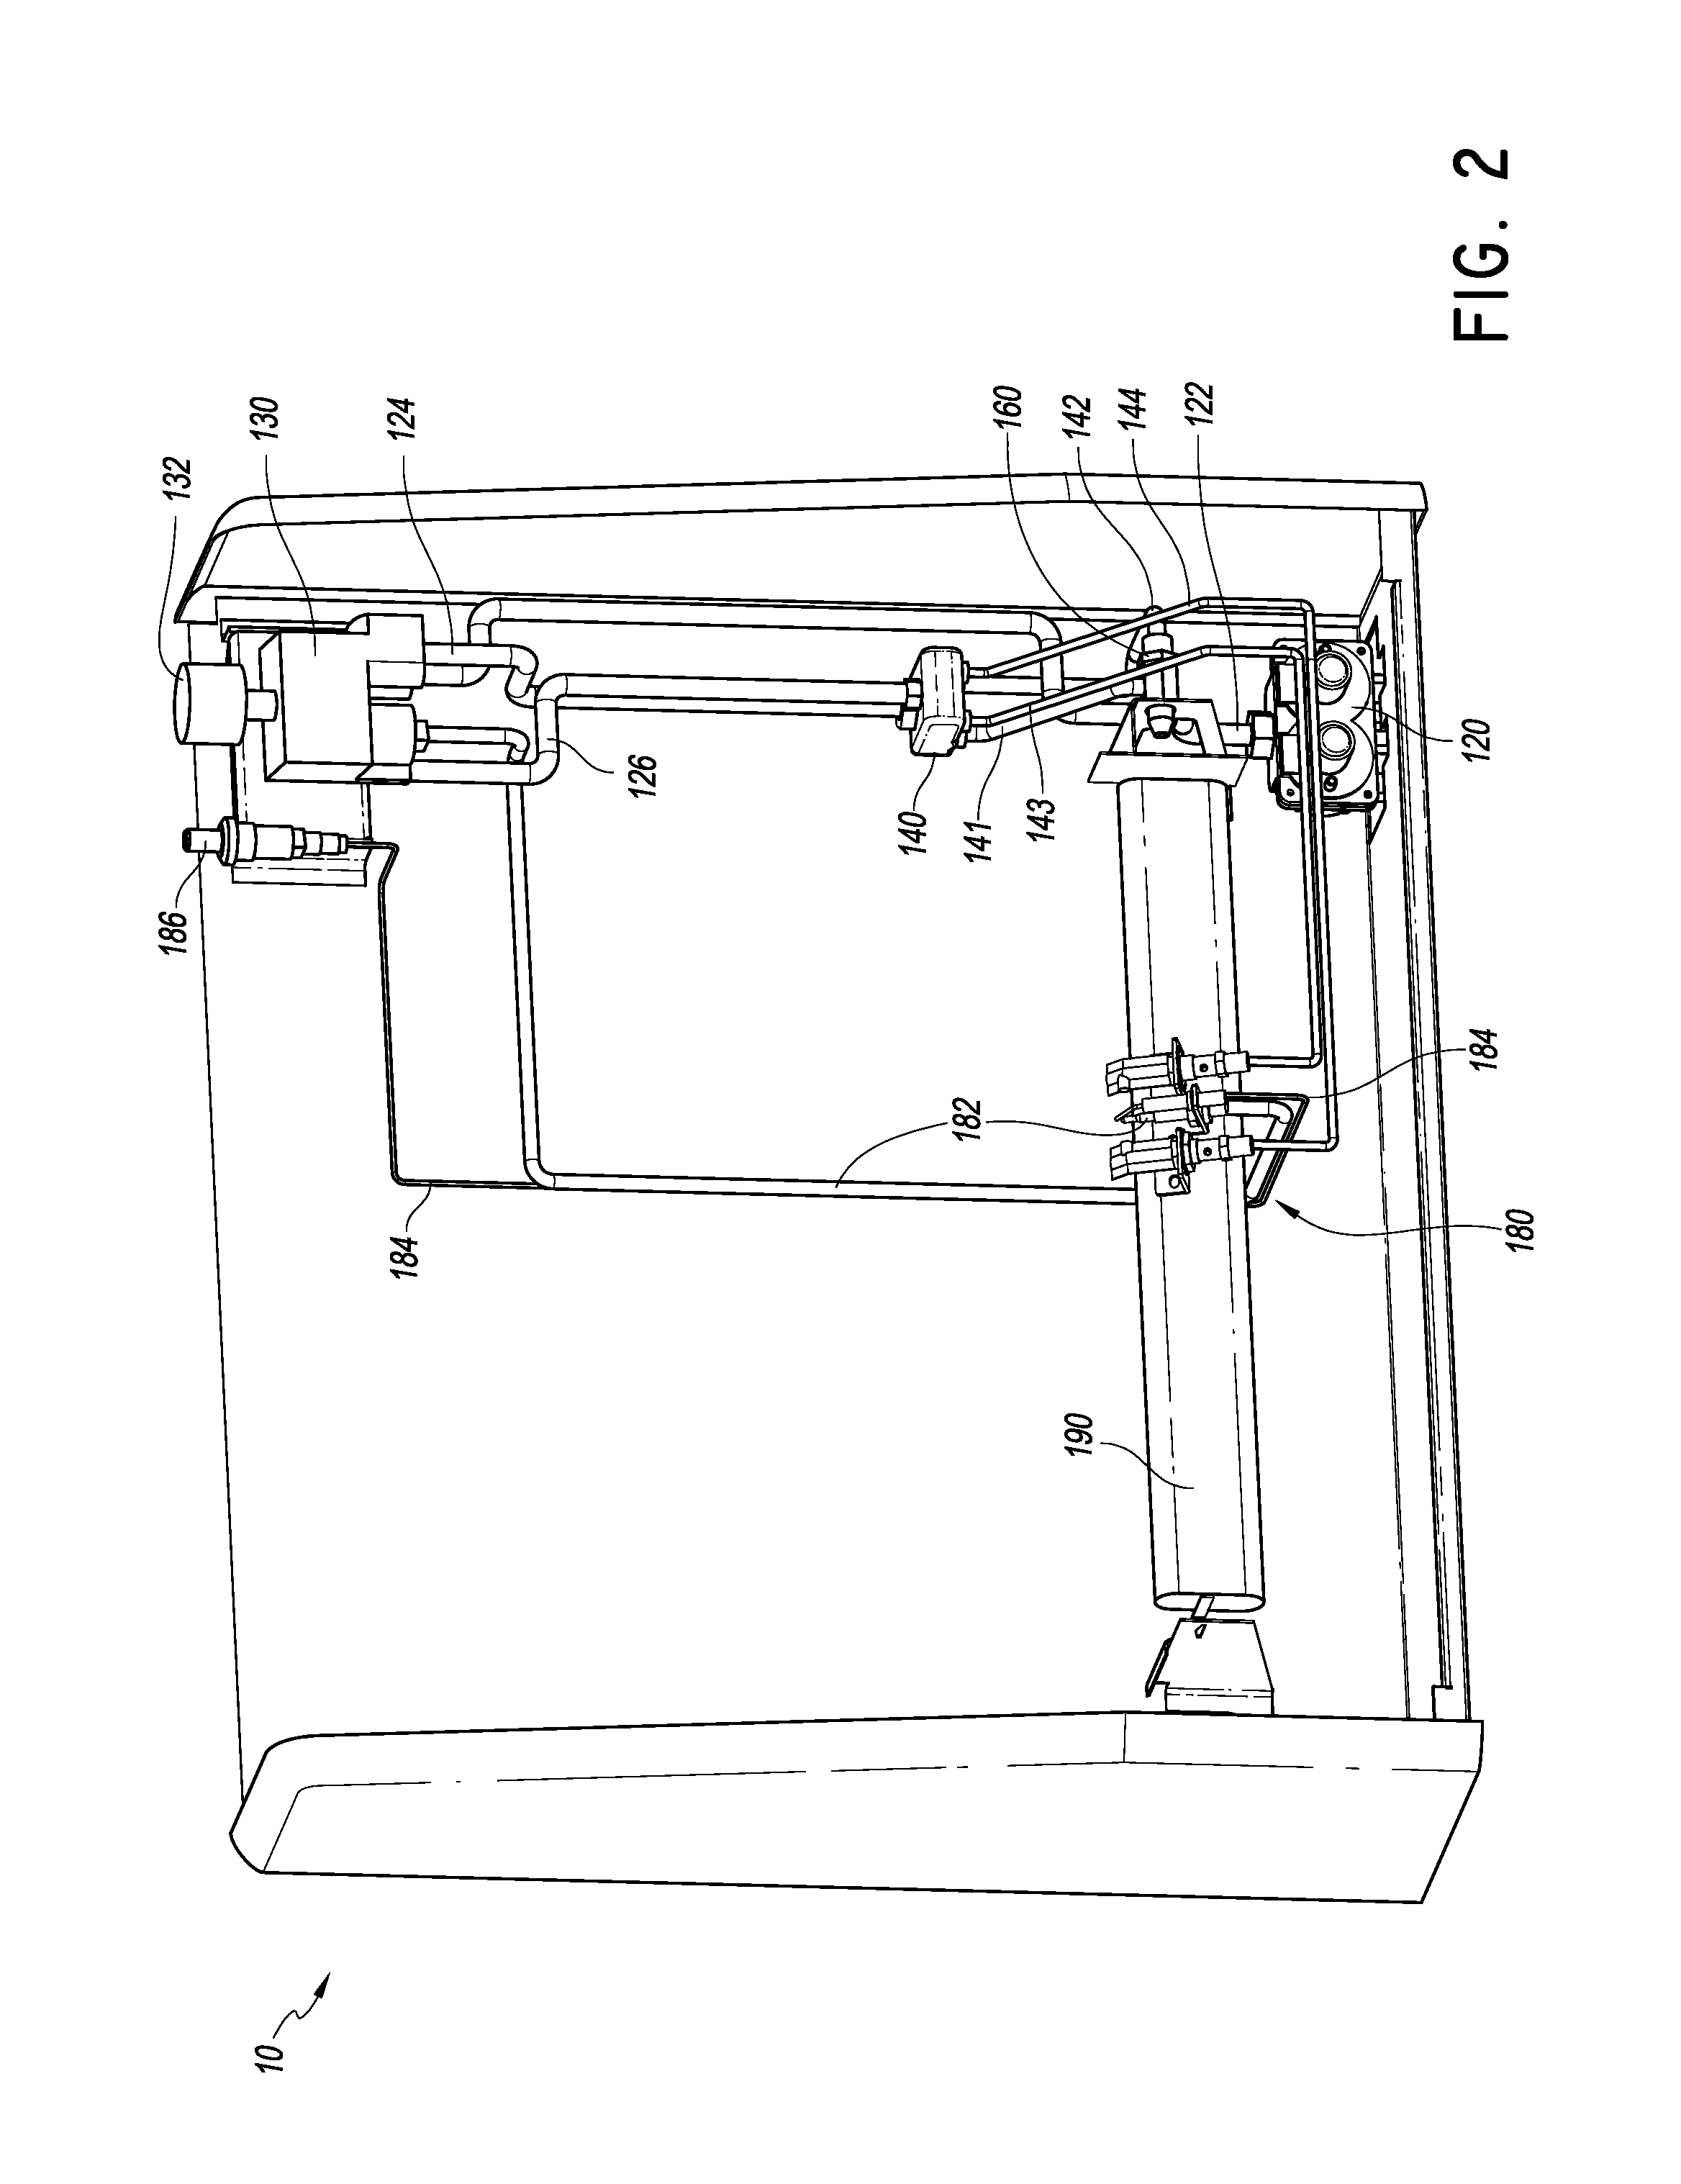 Dual fuel heater with selector valve